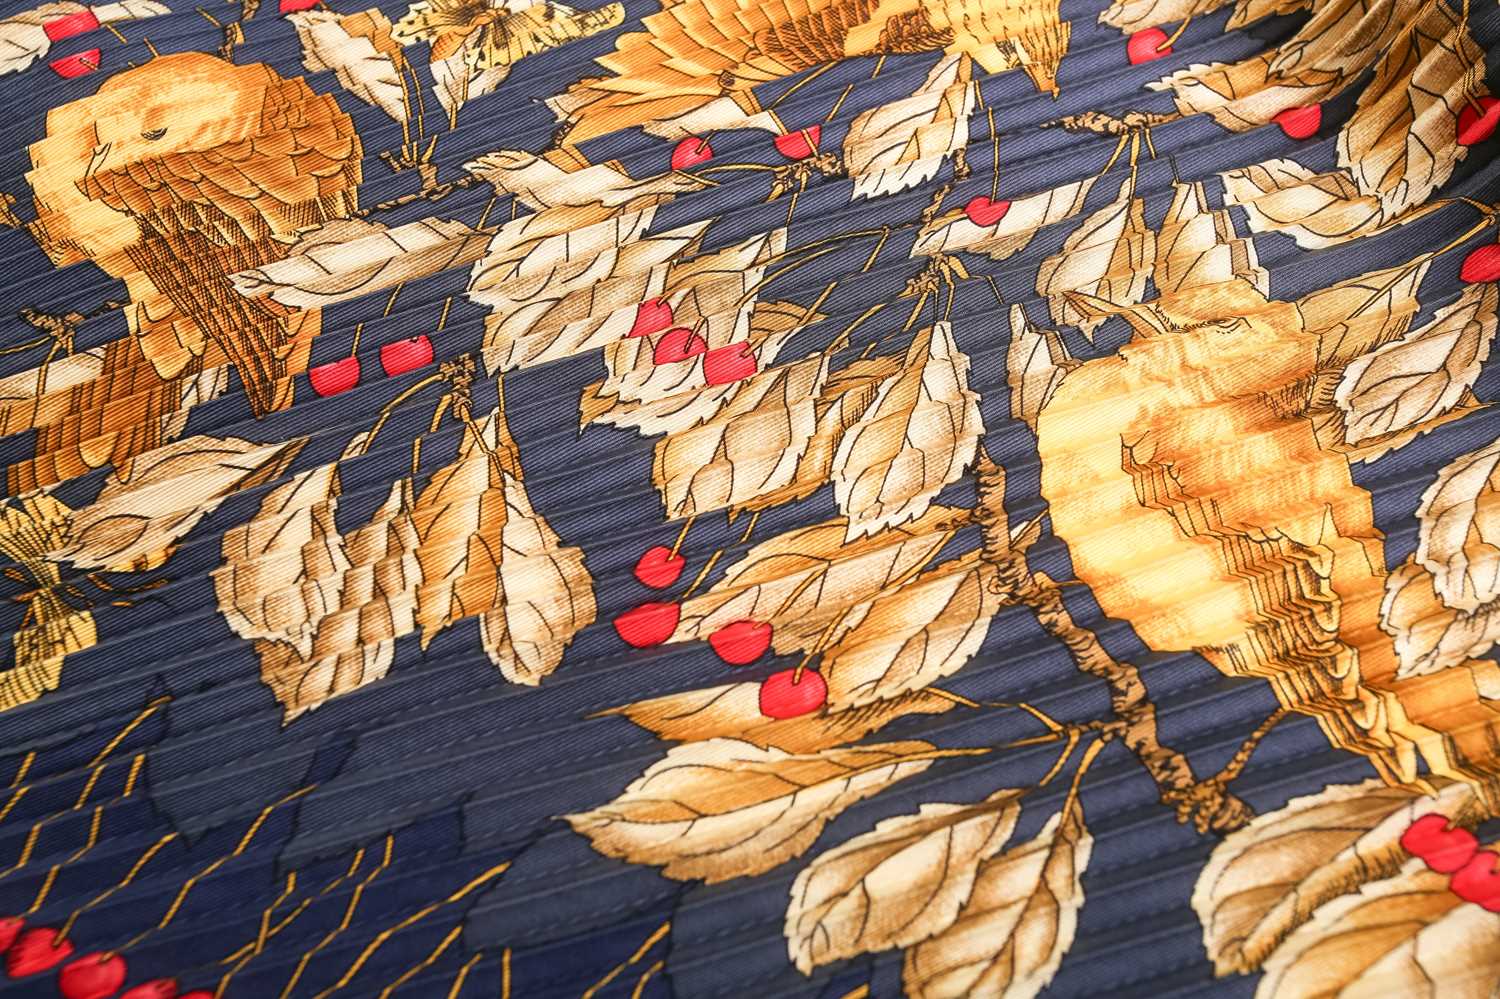 Hermès - 'Les Merises (Cherries)' silk pleated scarf in navy and gold colourway, illustrated with - Image 5 of 6